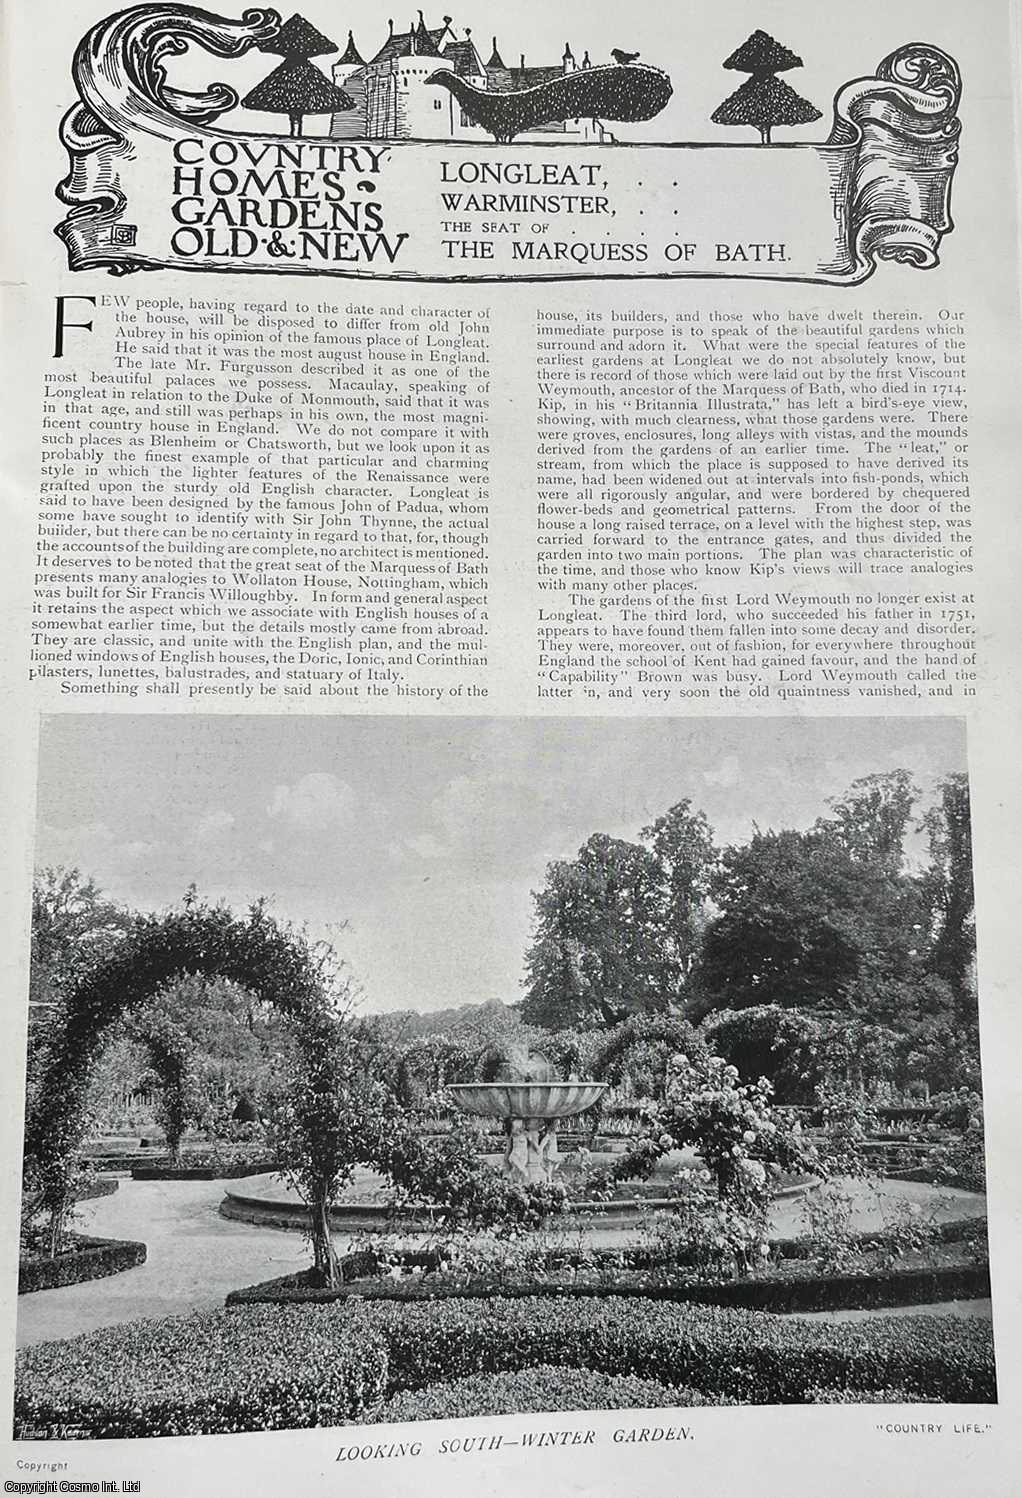 Country Life Magazine - Longleat, Warminster. Several pictures and accompanying text, removed from an original issue of Country Life Magazine, 1902.